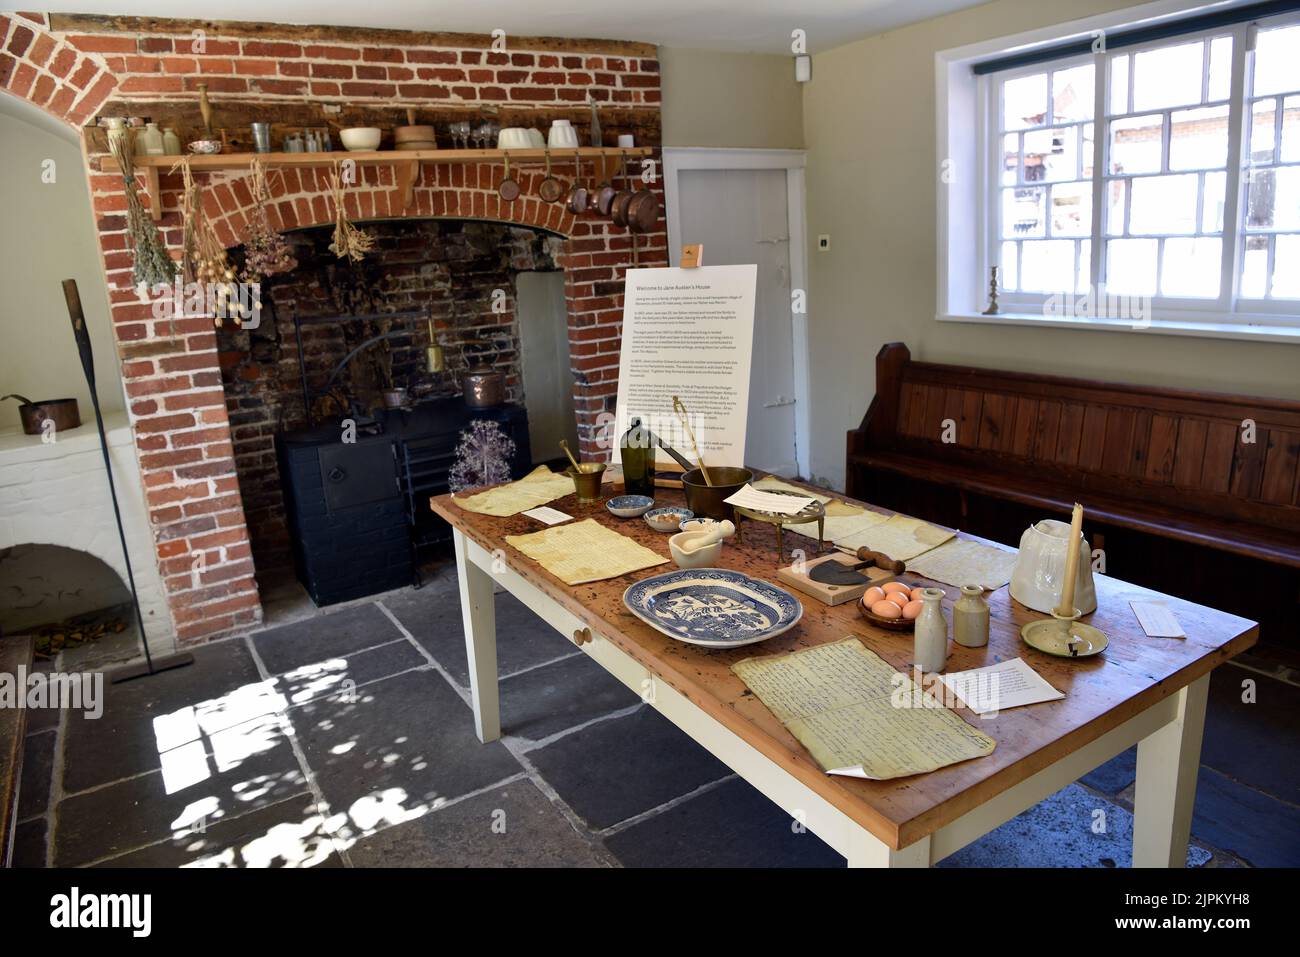 Objects and utensils on display in kitchen at Jane Austen’s House, Chawton, near Alton, Hampshire, UK. Stock Photo